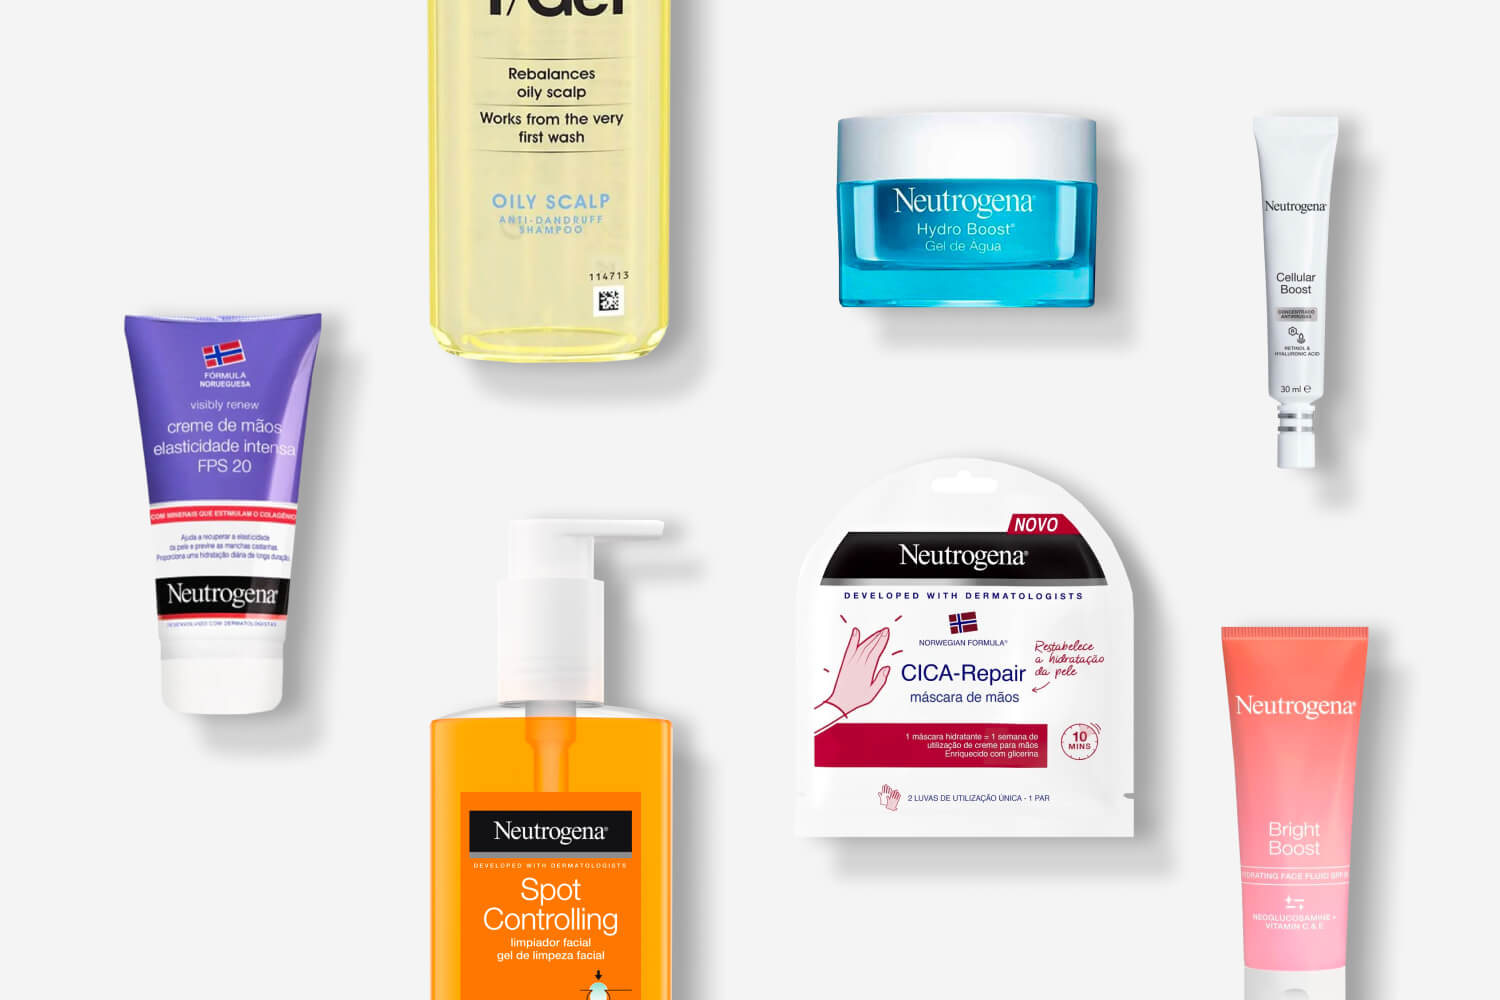 Best Neutrogena Products to Repair & Protect · Care to Beauty